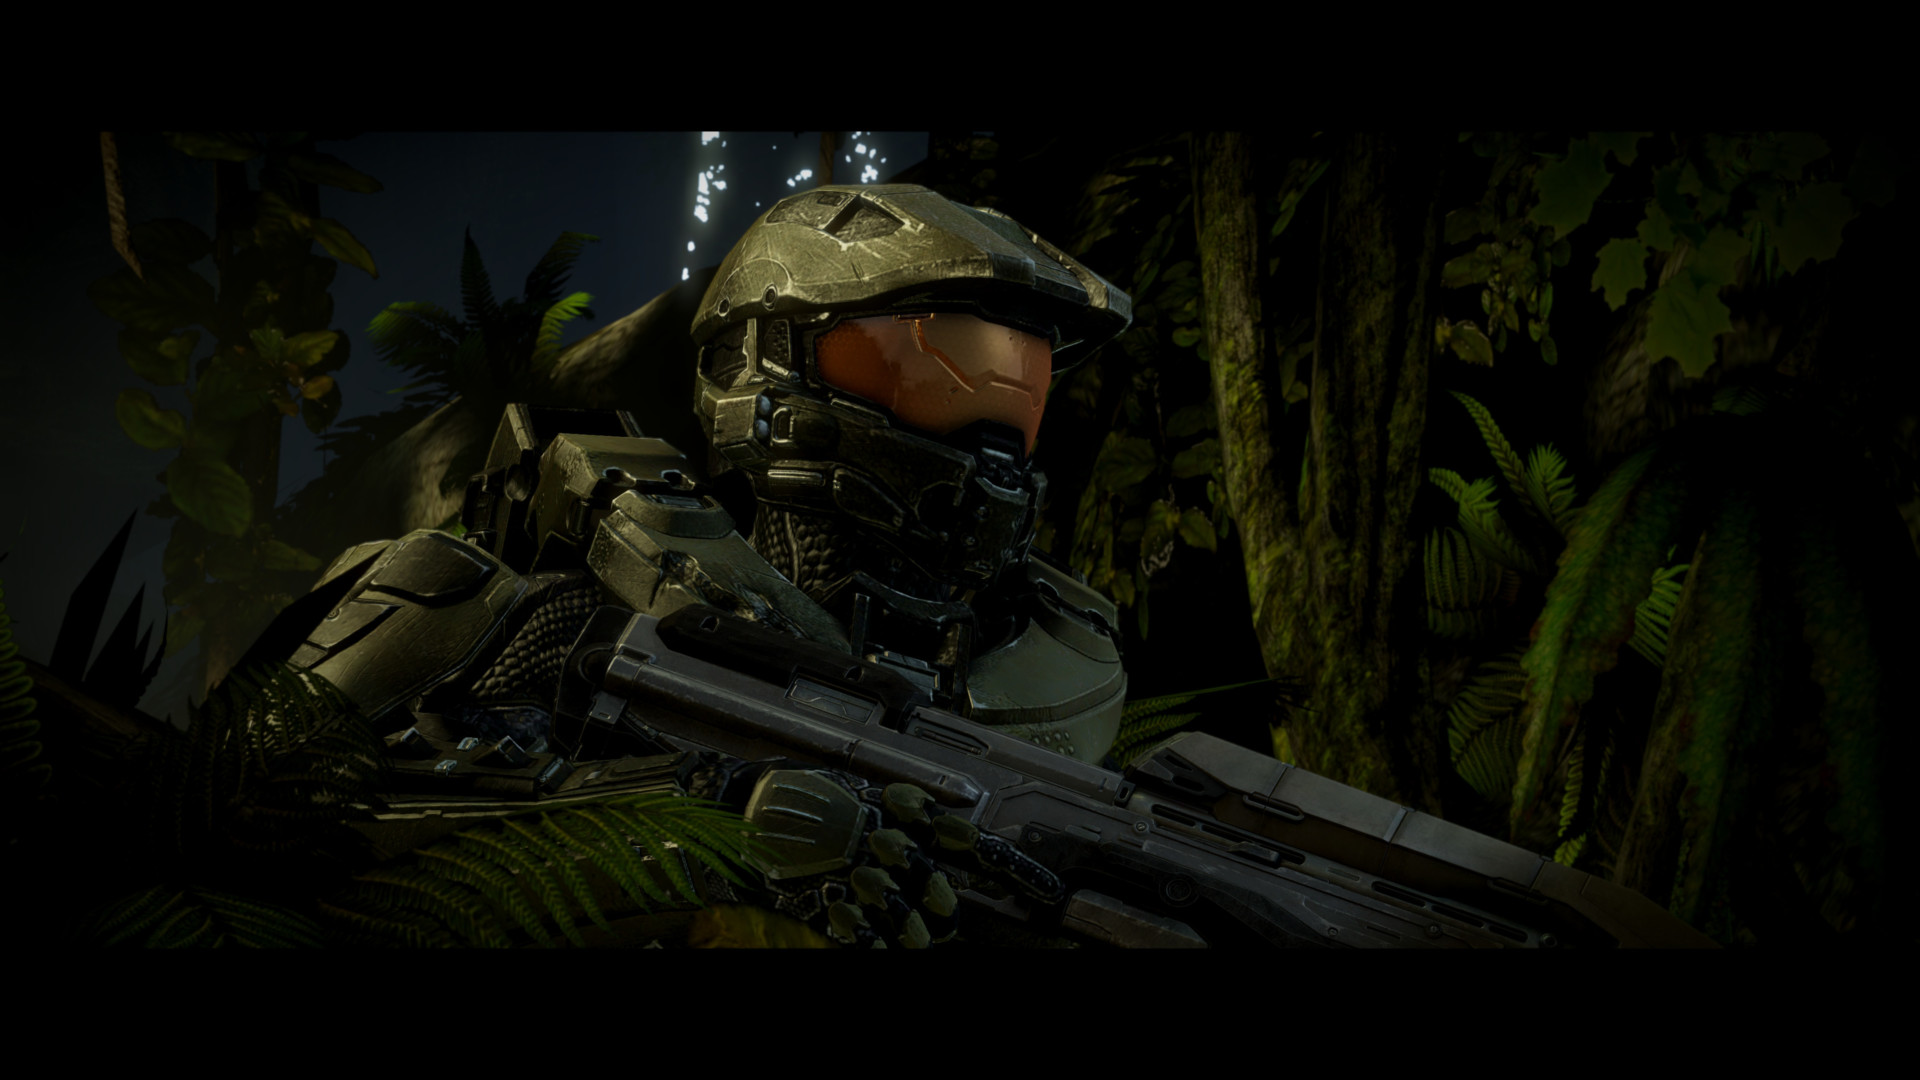 Review: Master Chief returns in stellar 'Halo 4' - The San Diego